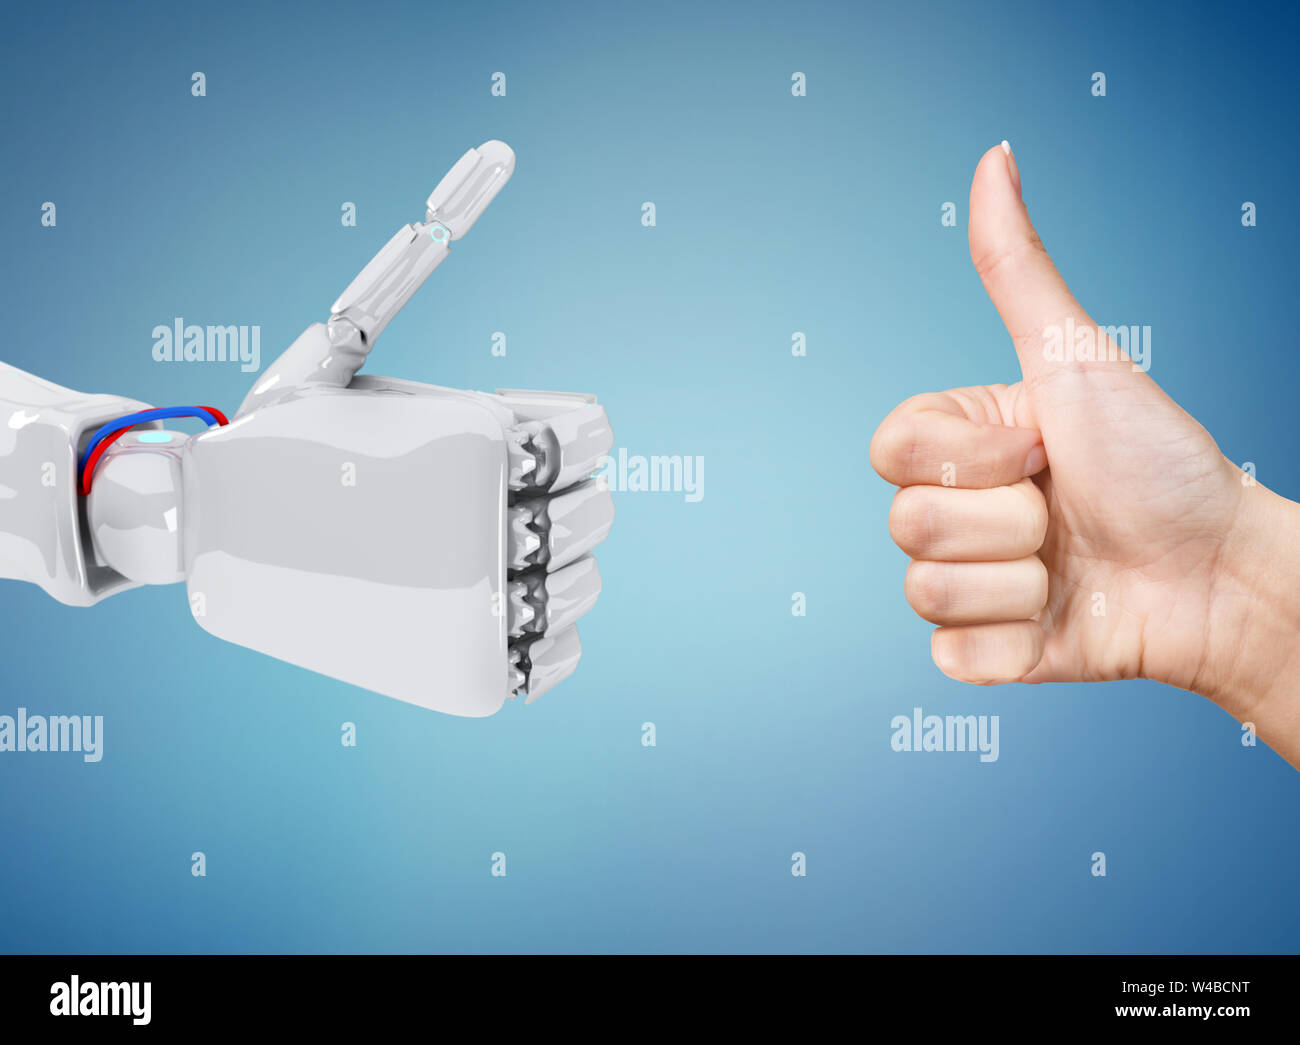 Robot and human hands shows thumbs up gesture. Stock Photo